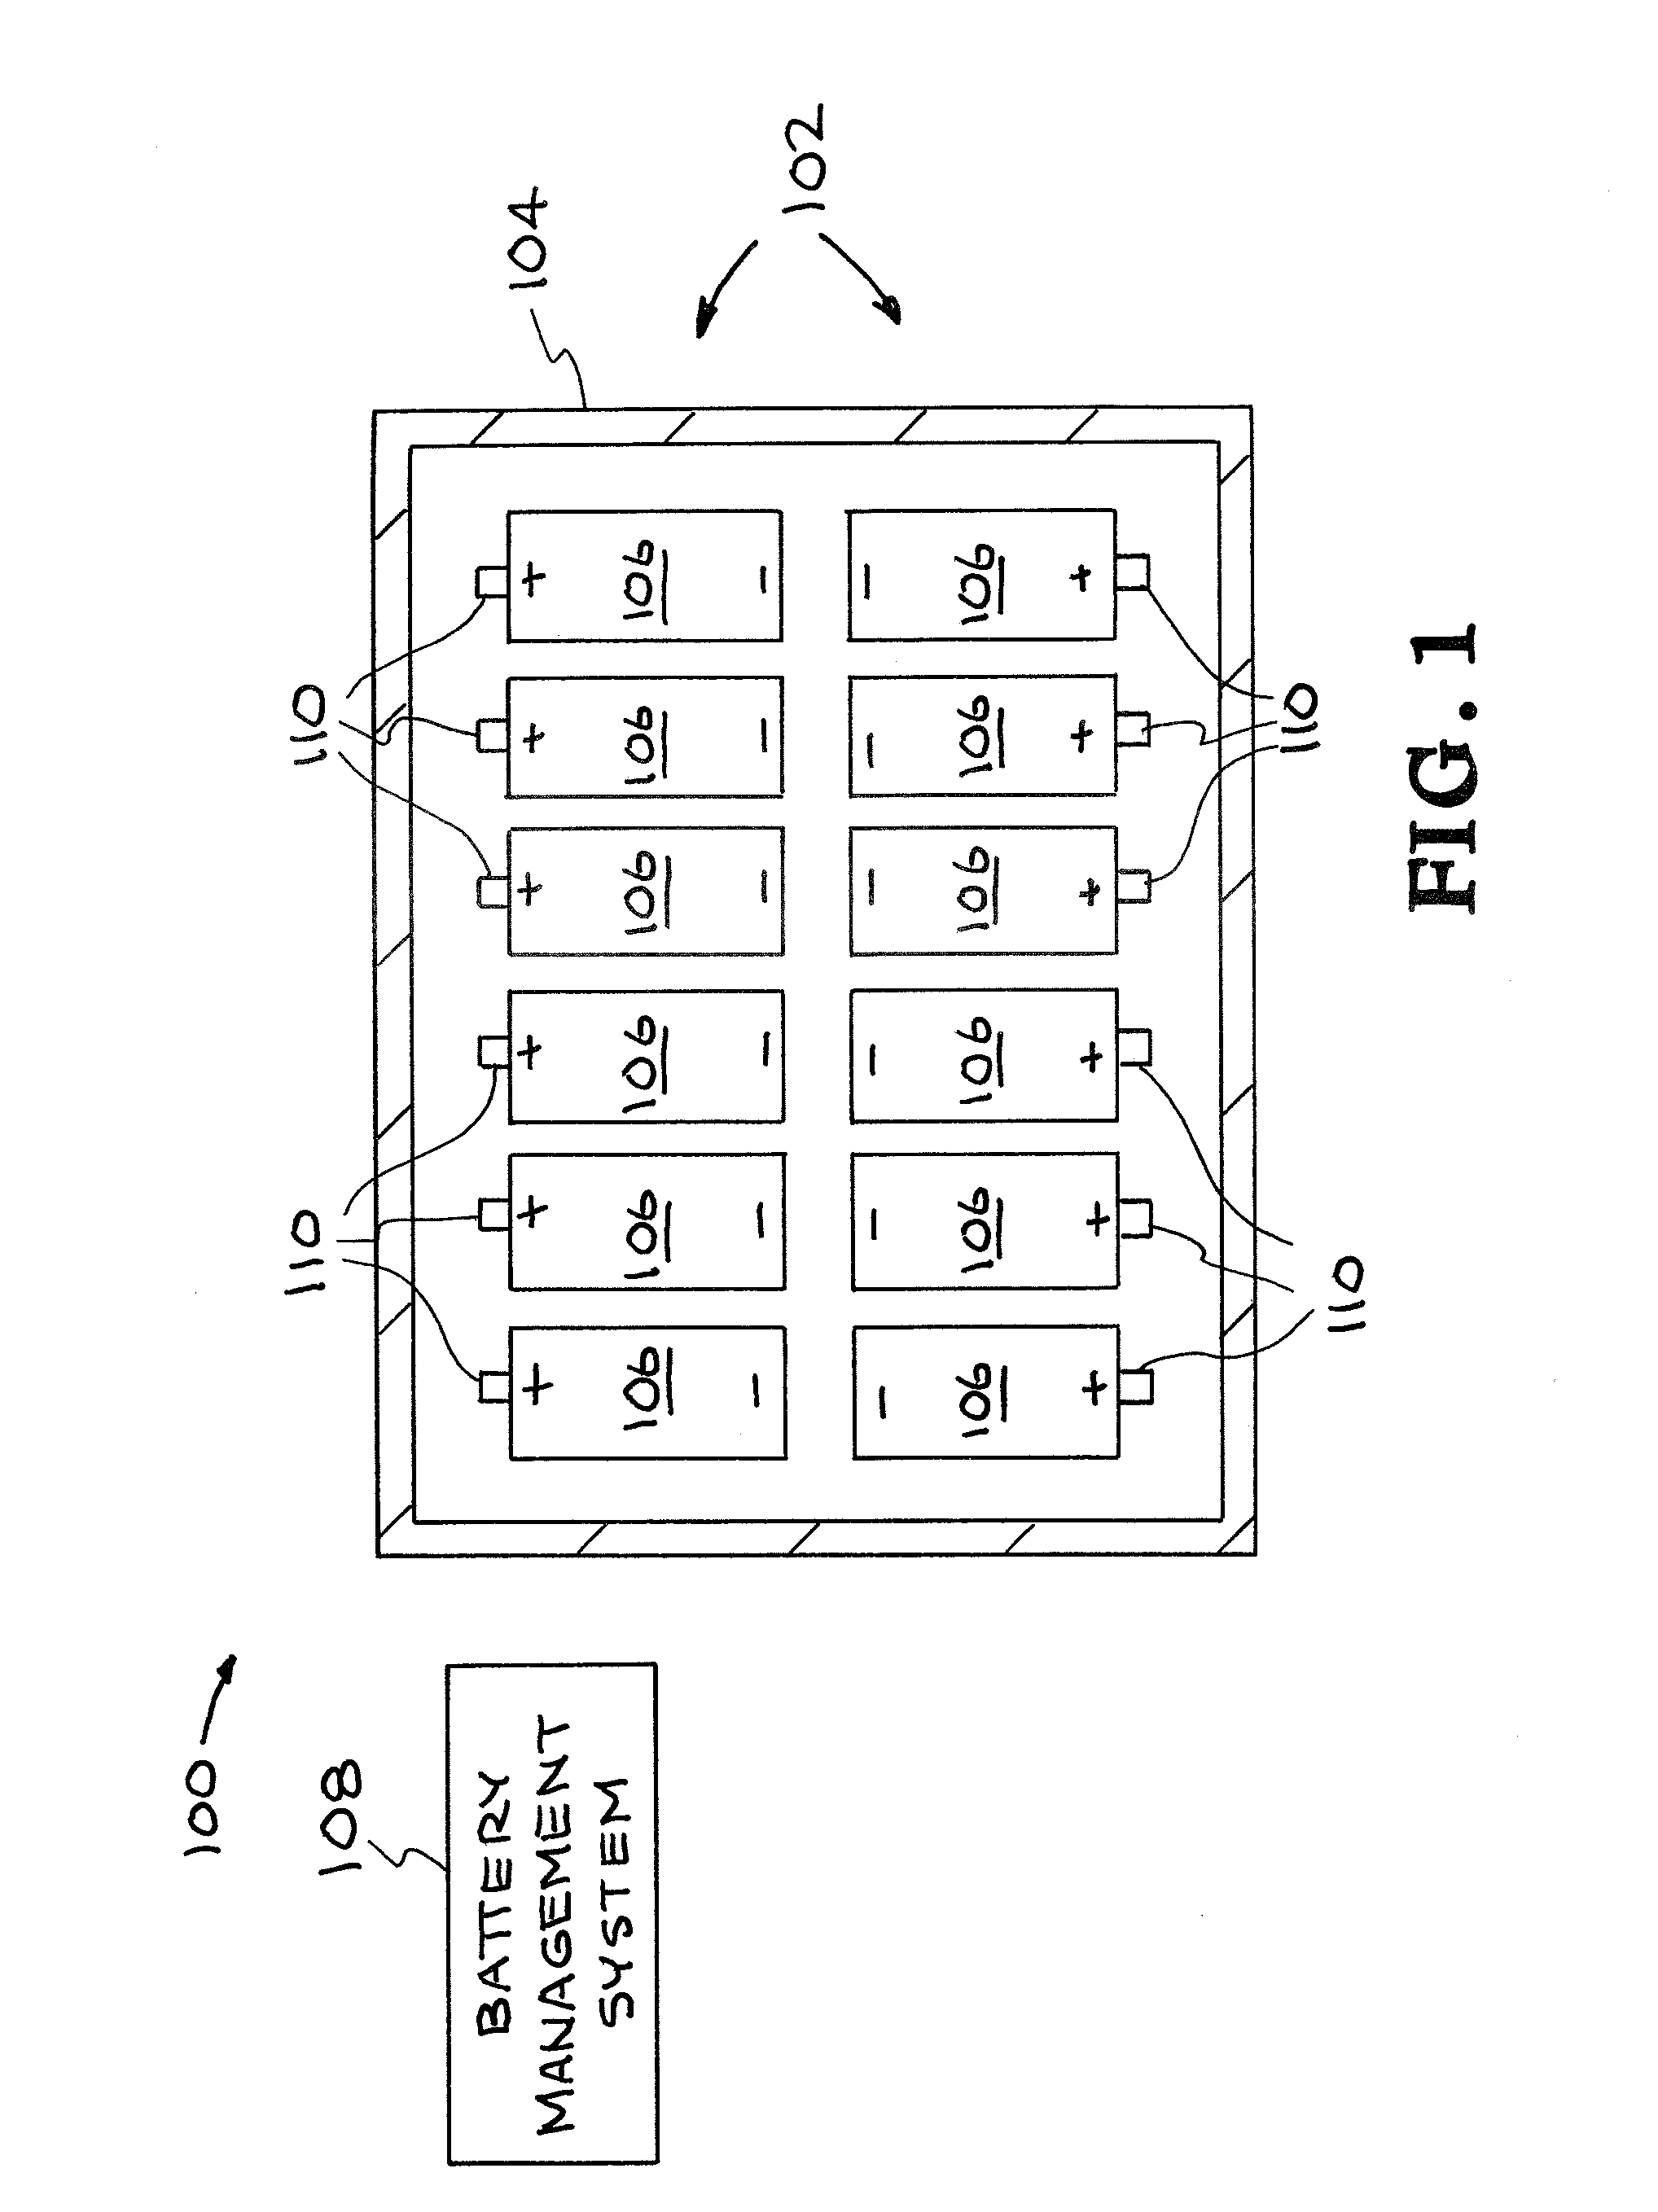 Battery management system with distributed wireless sensors